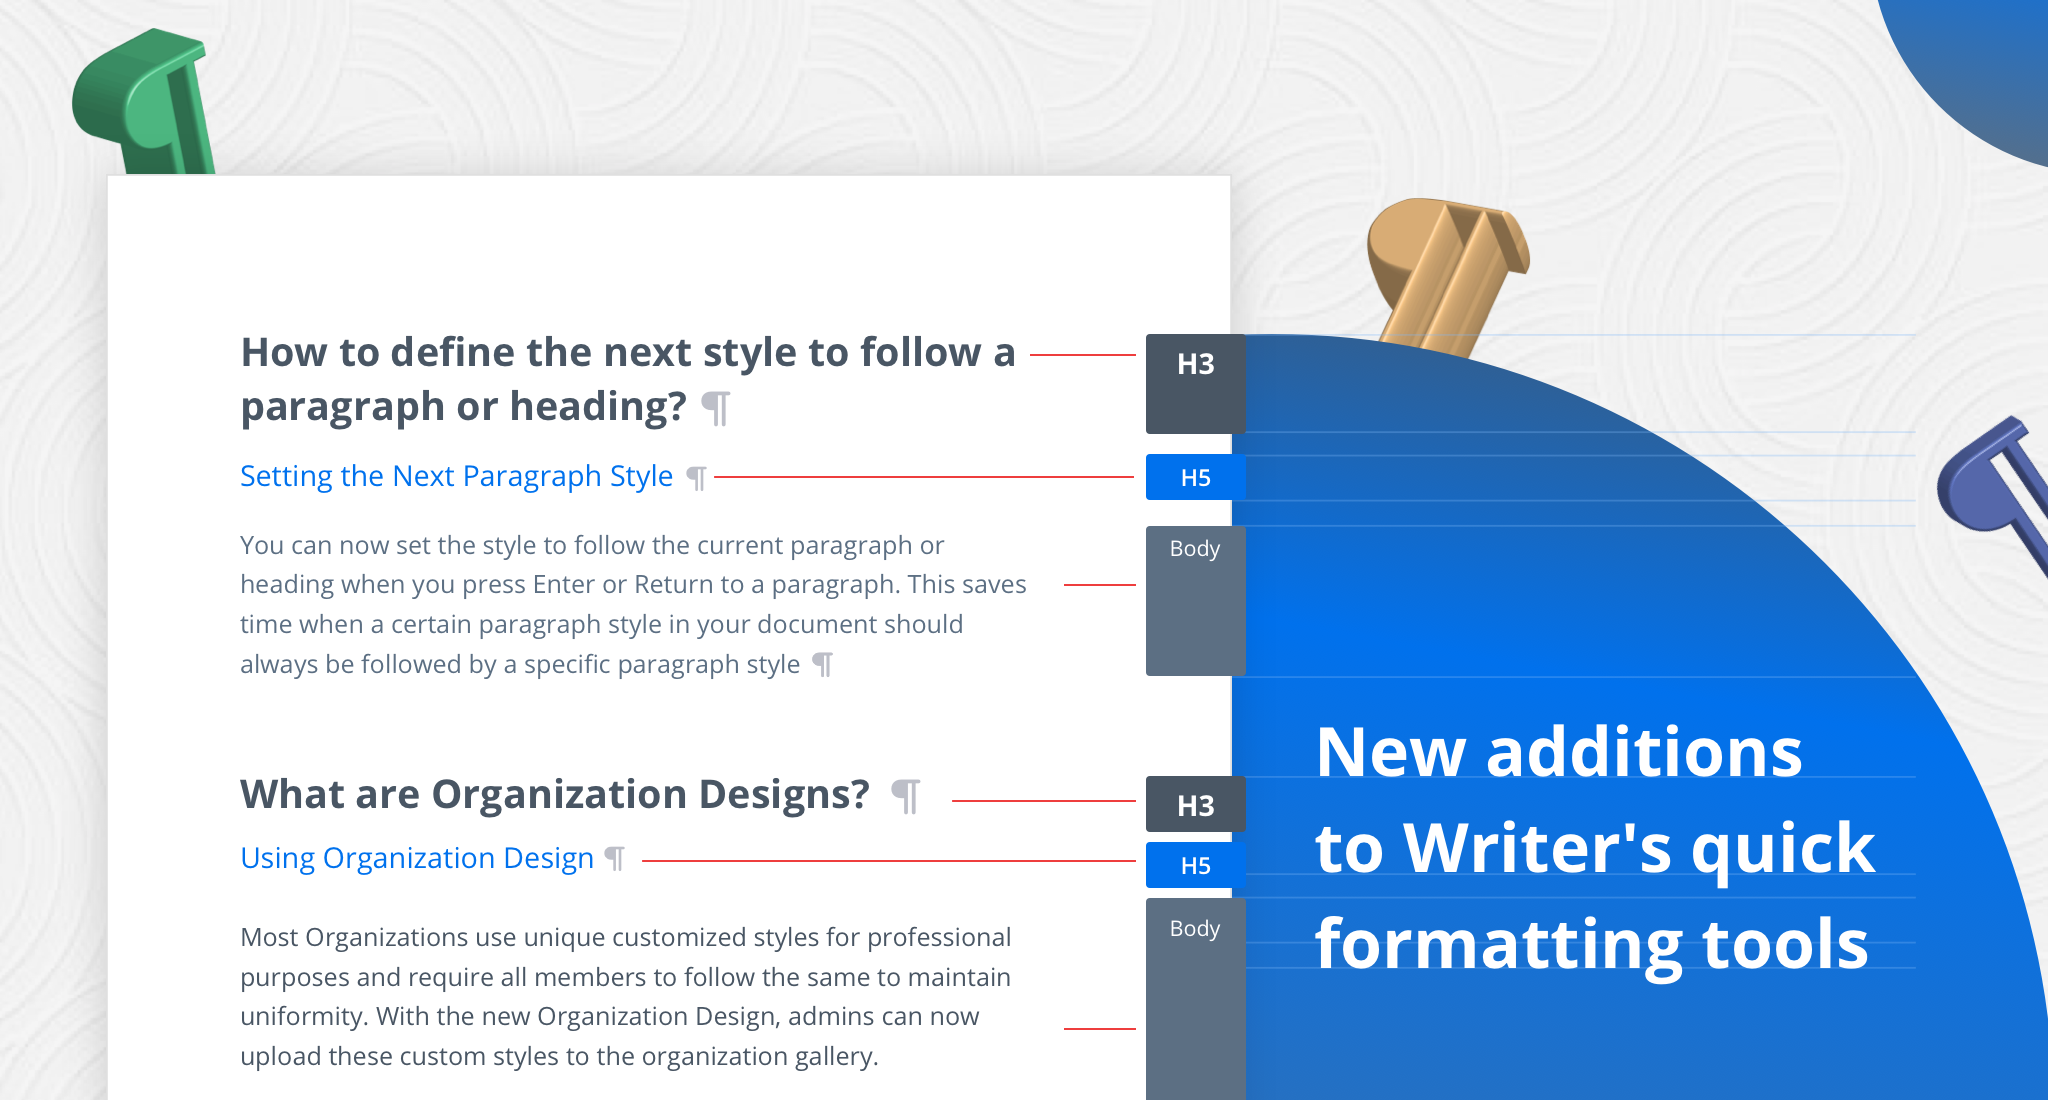 Get work done faster with Next Paragraph Style and Organization Design gallery!